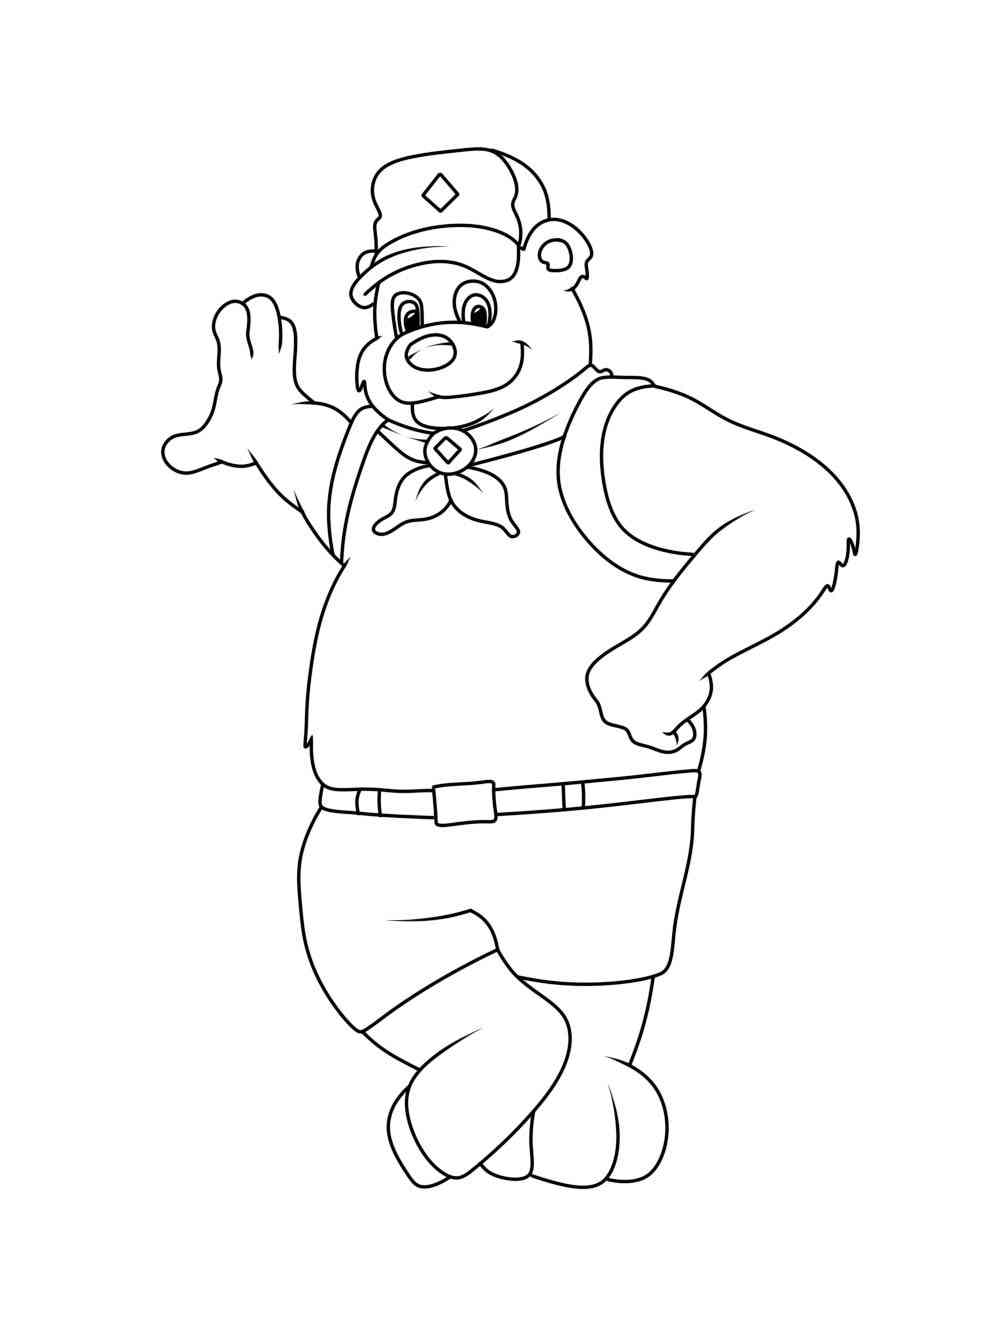 Cub Scout coloring page - Free printable